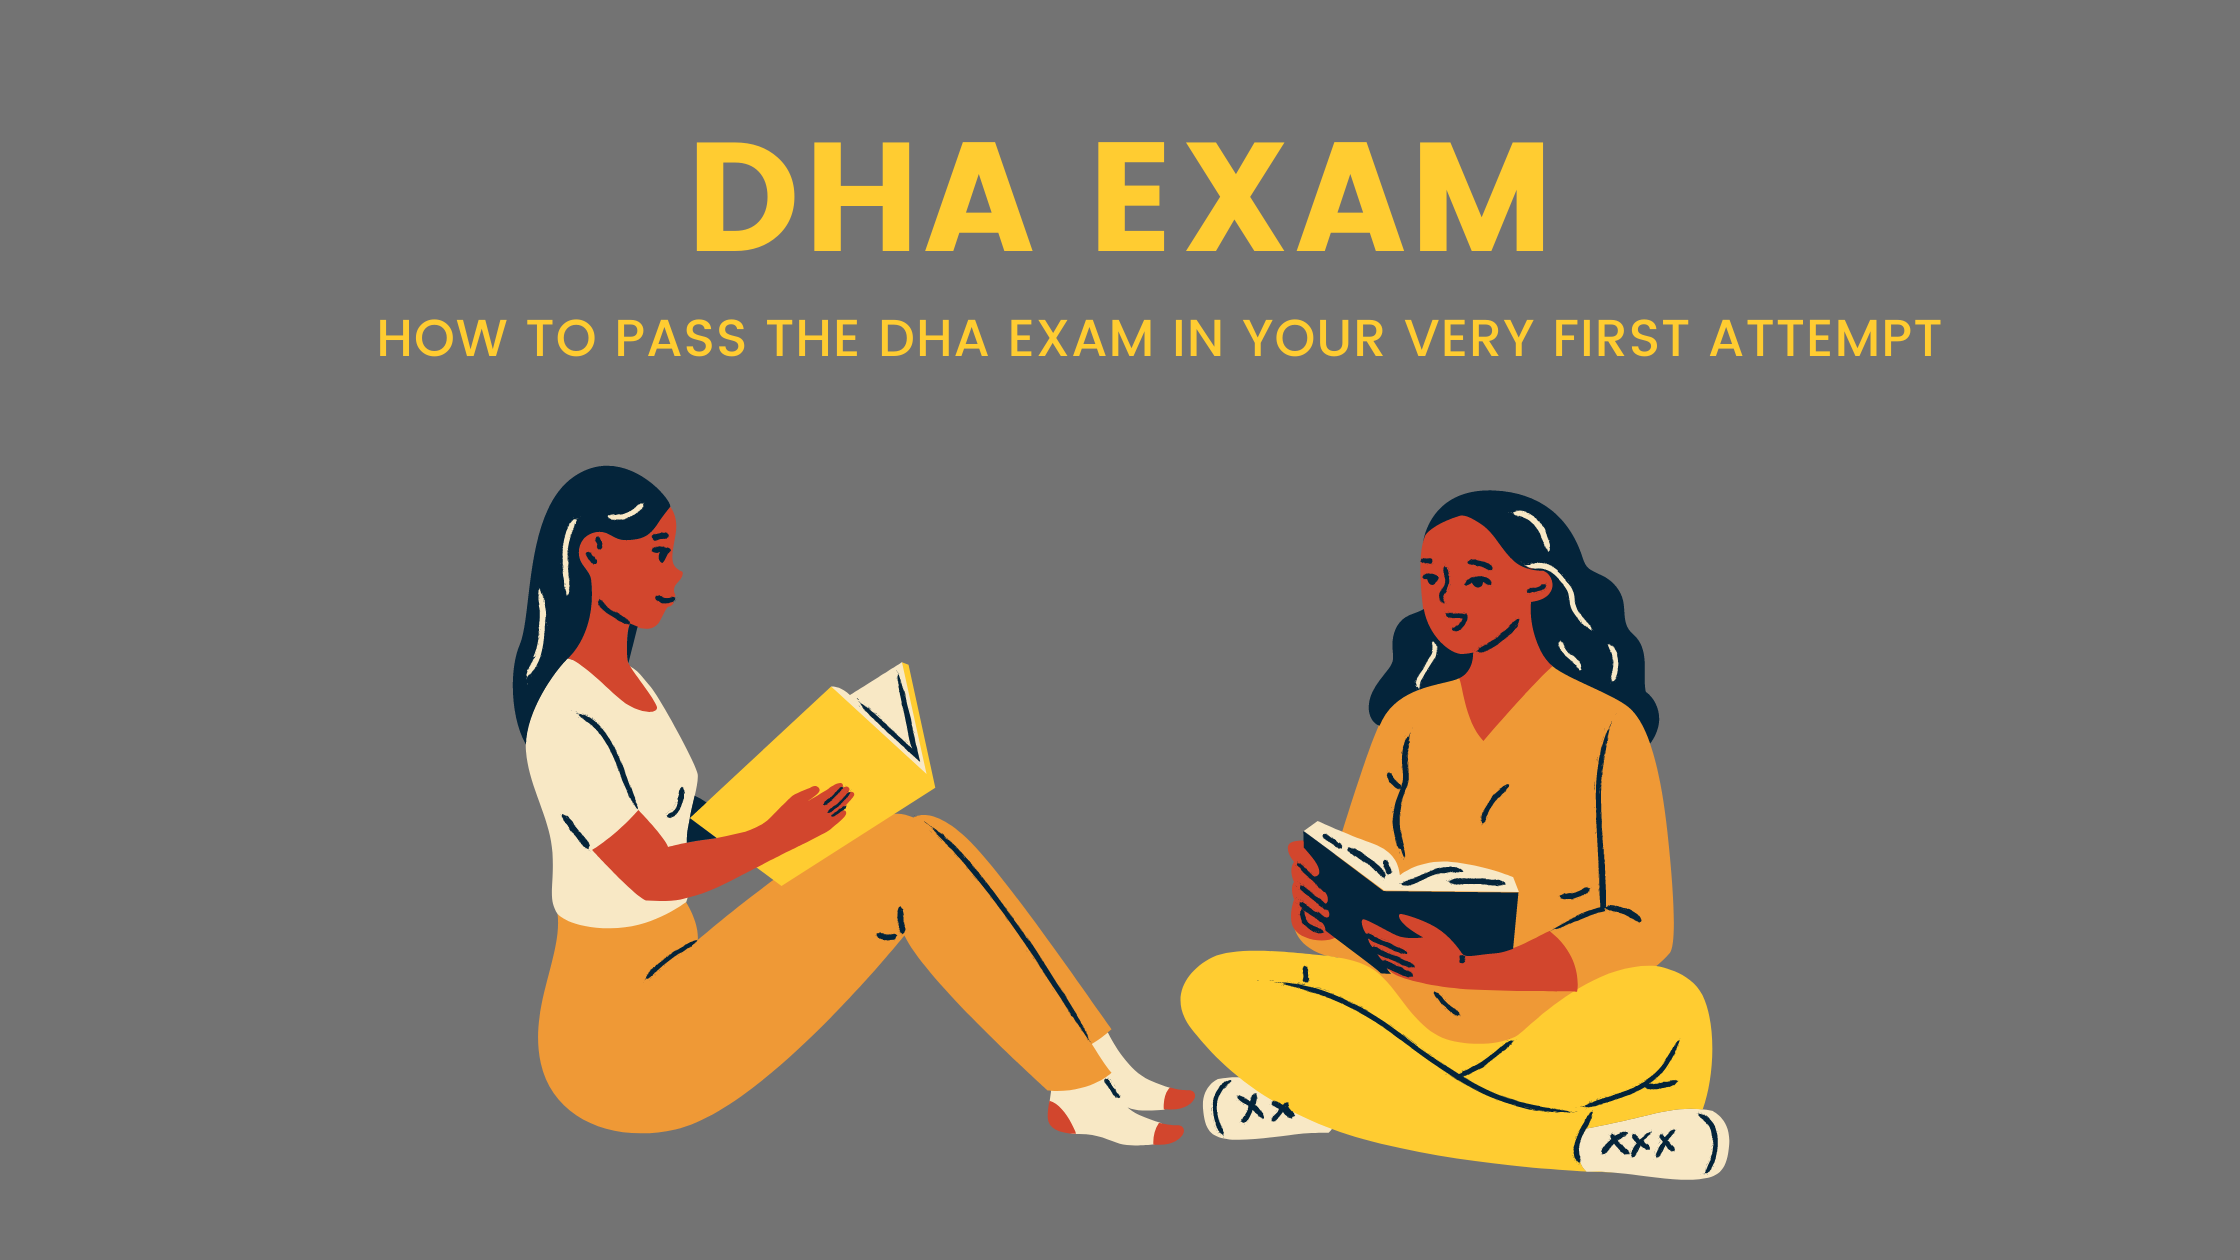 How to pass the DHA exam in your very first attempt.